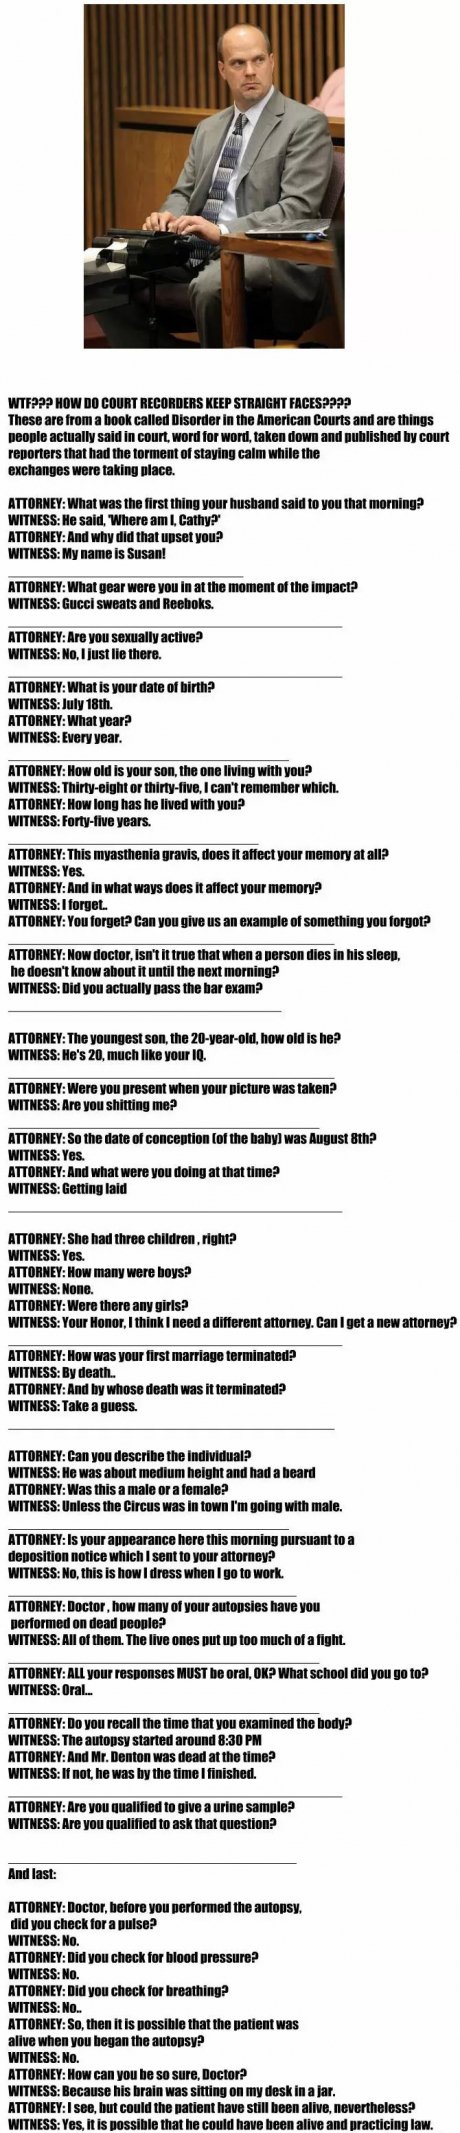 Things people actually said in court WinFail Picture Webfail Fail